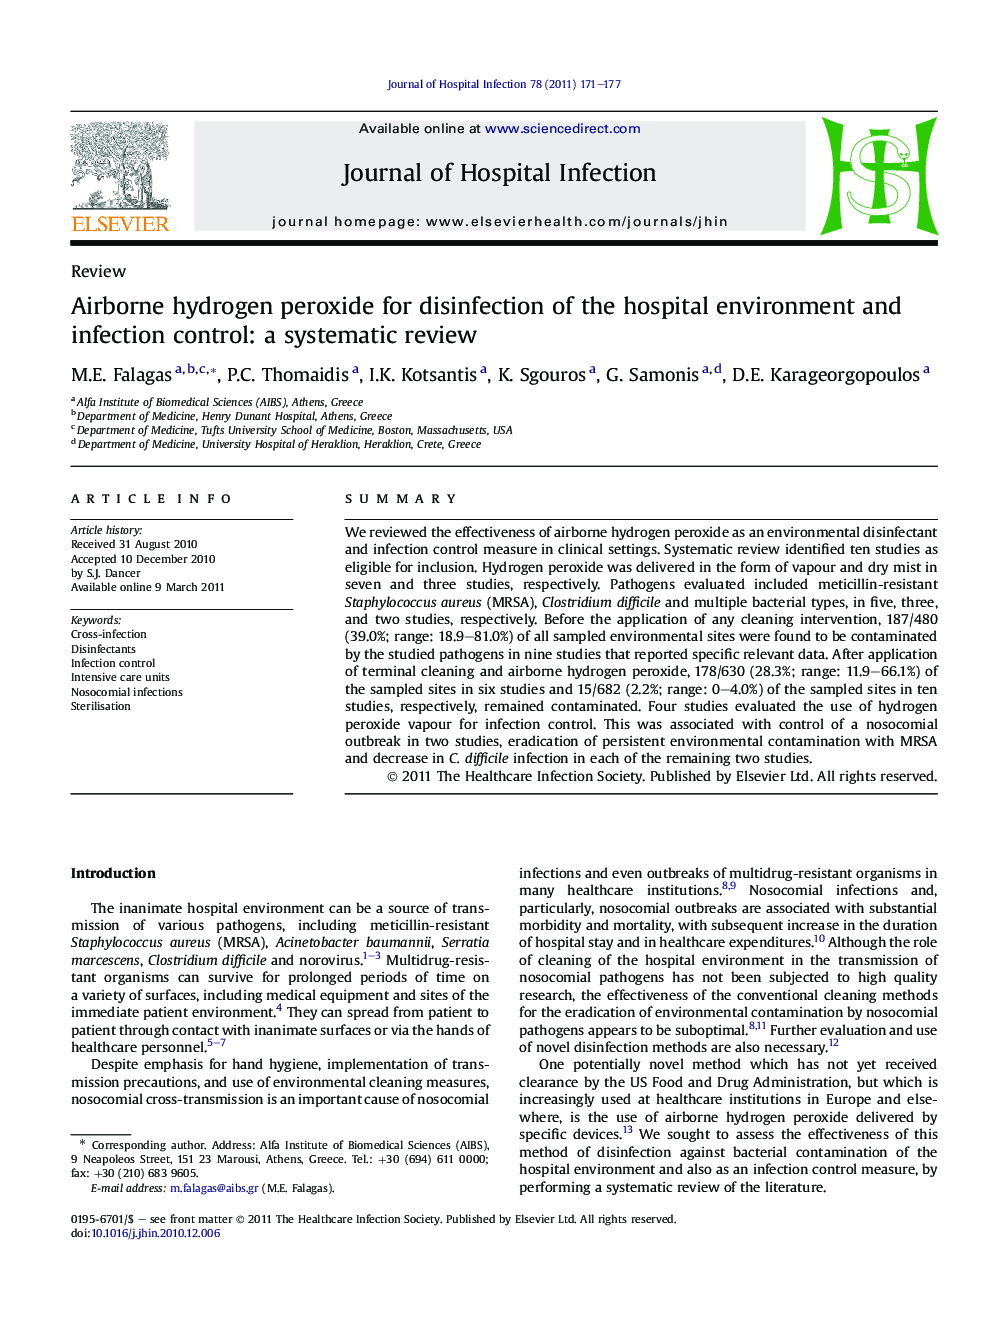 Airborne hydrogen peroxide for disinfection of the hospital environment and infection control: a systematic review